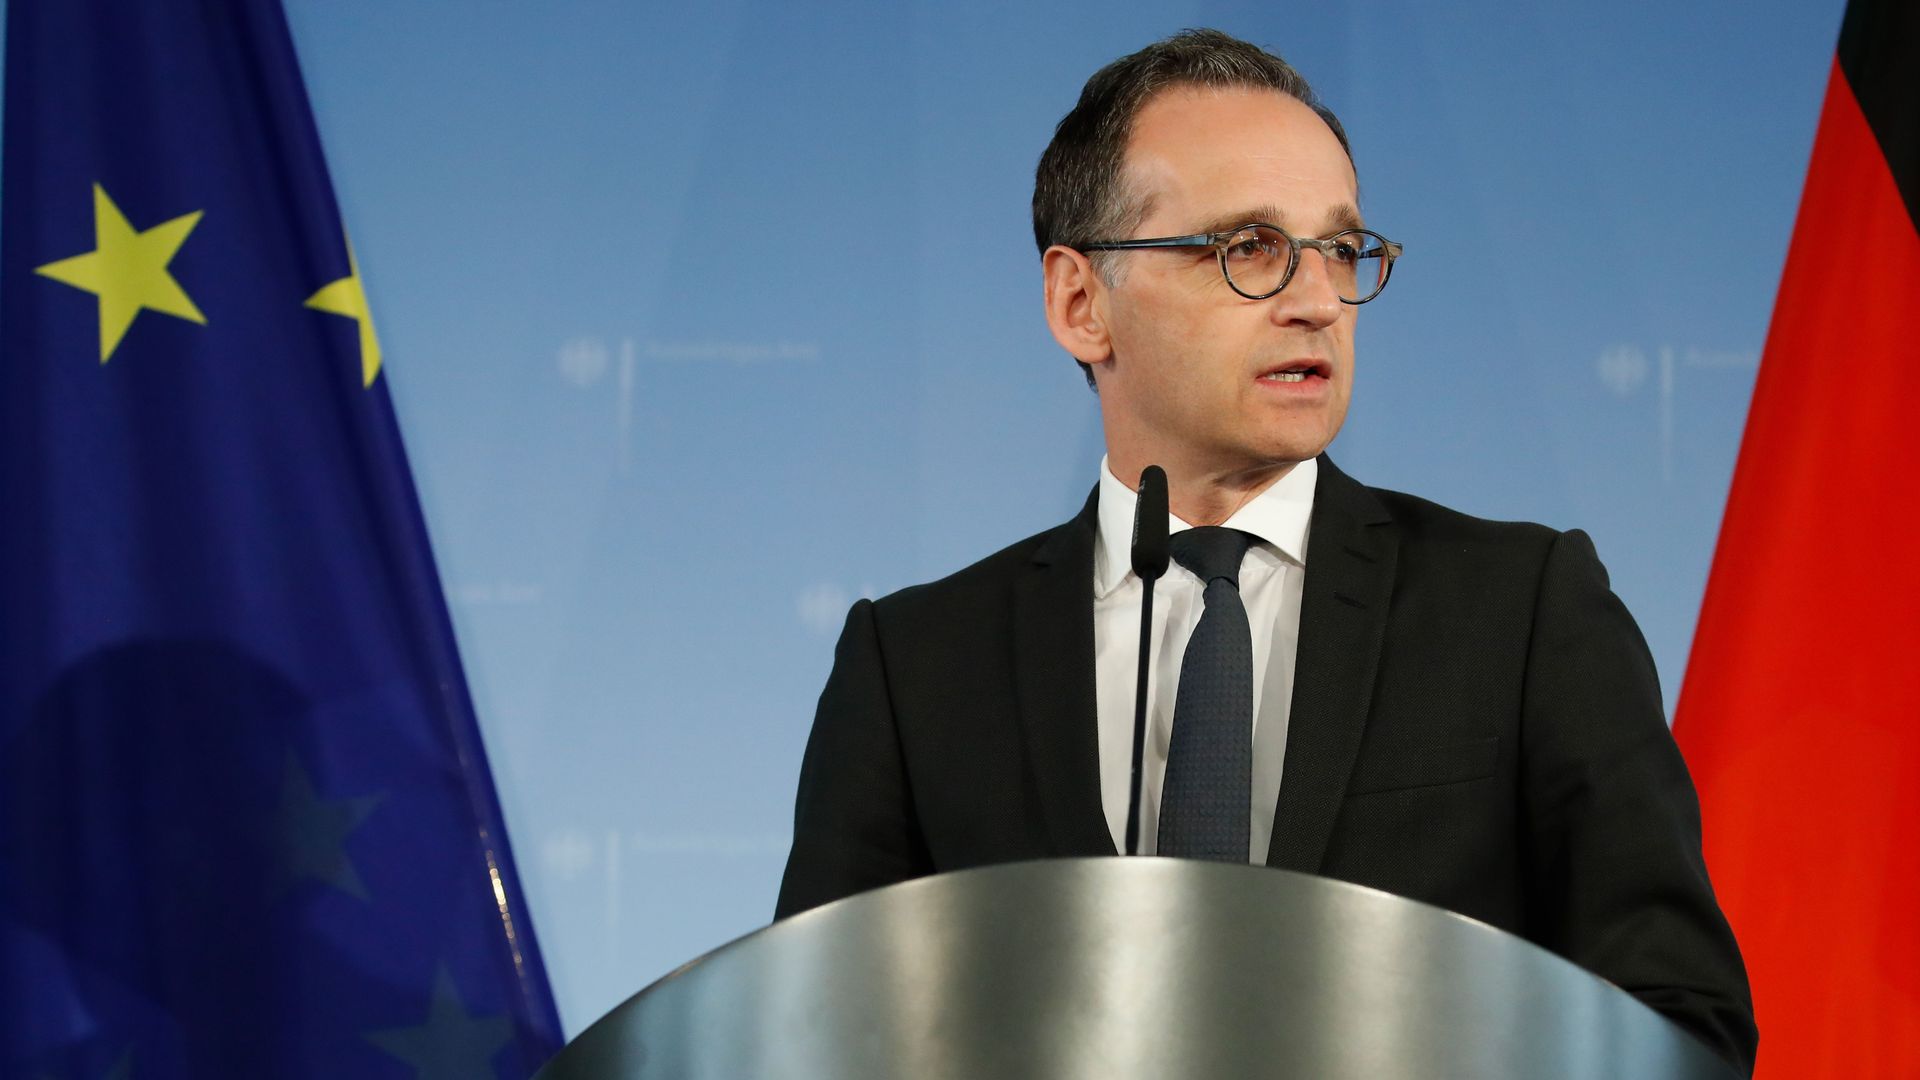 German Foreign Minister Heiko Maas gives a statement on May 9, 2018 in Berlin after President Trump pulled the United States out of a landmark deal curbing Iran's nuclear program.